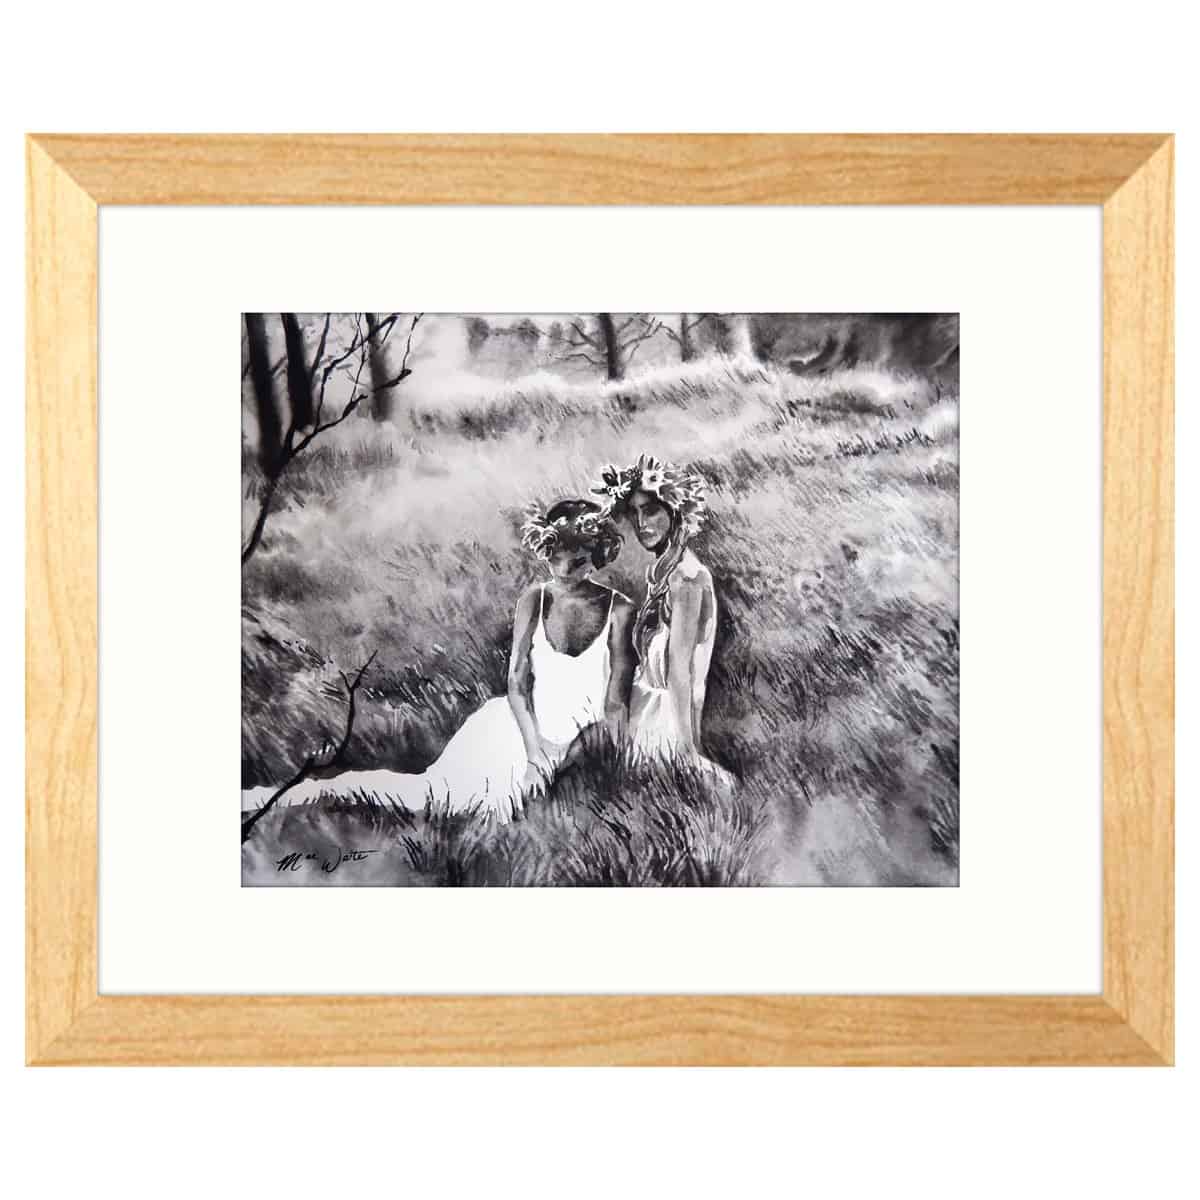 mae waite ladies in the meadow matted wood frame